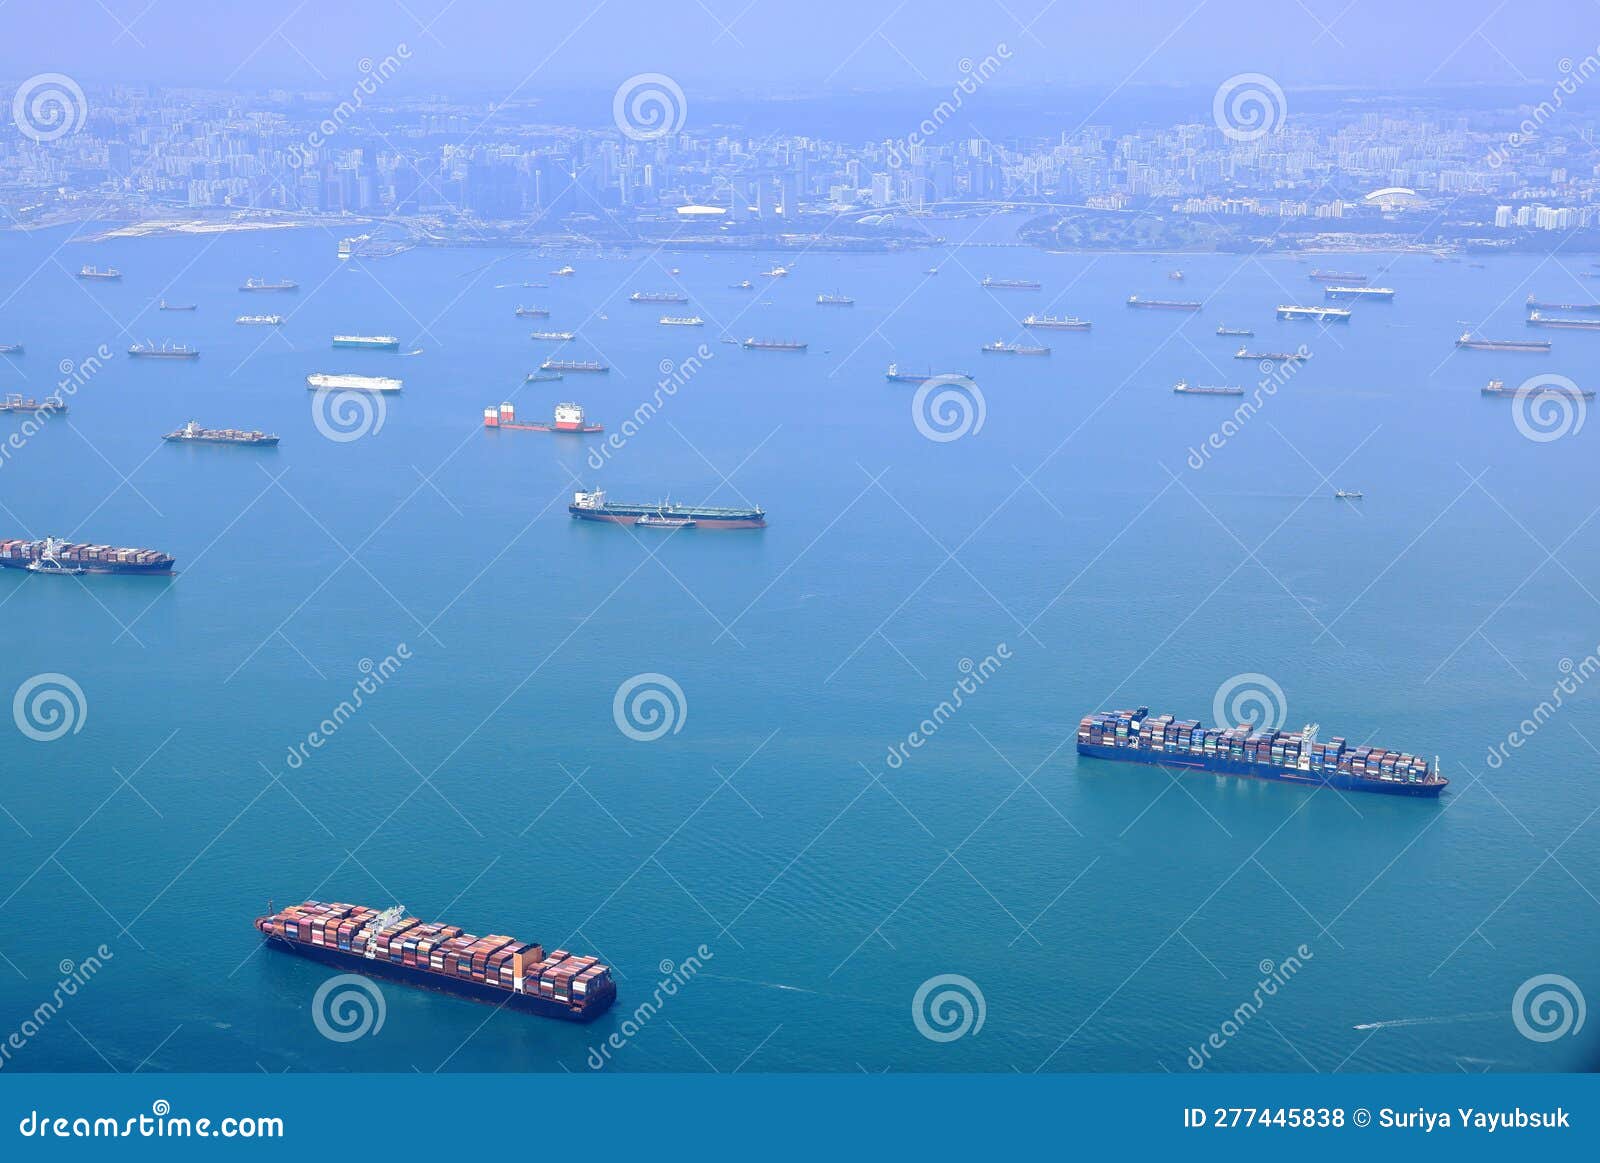 high angle shot of ocean liner, tanker and cargo ship in singapore strait.